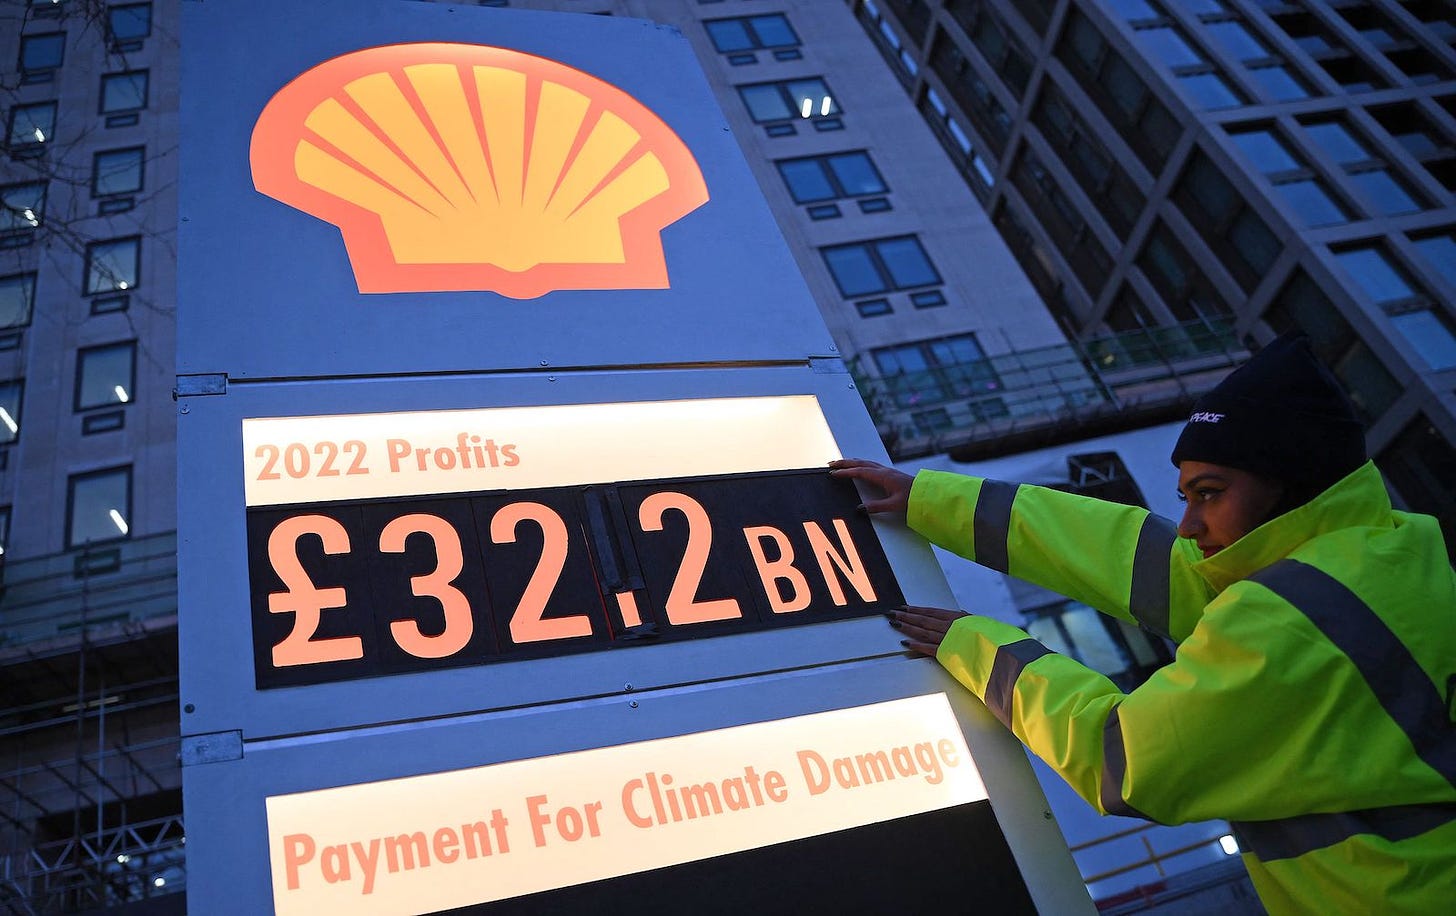 A woman in a yellow safety jacket adjusts numbers on a Shell gas station logo. The numbers read: 2022 profits, 32.2 billion pounds, payment for climate damages zero.